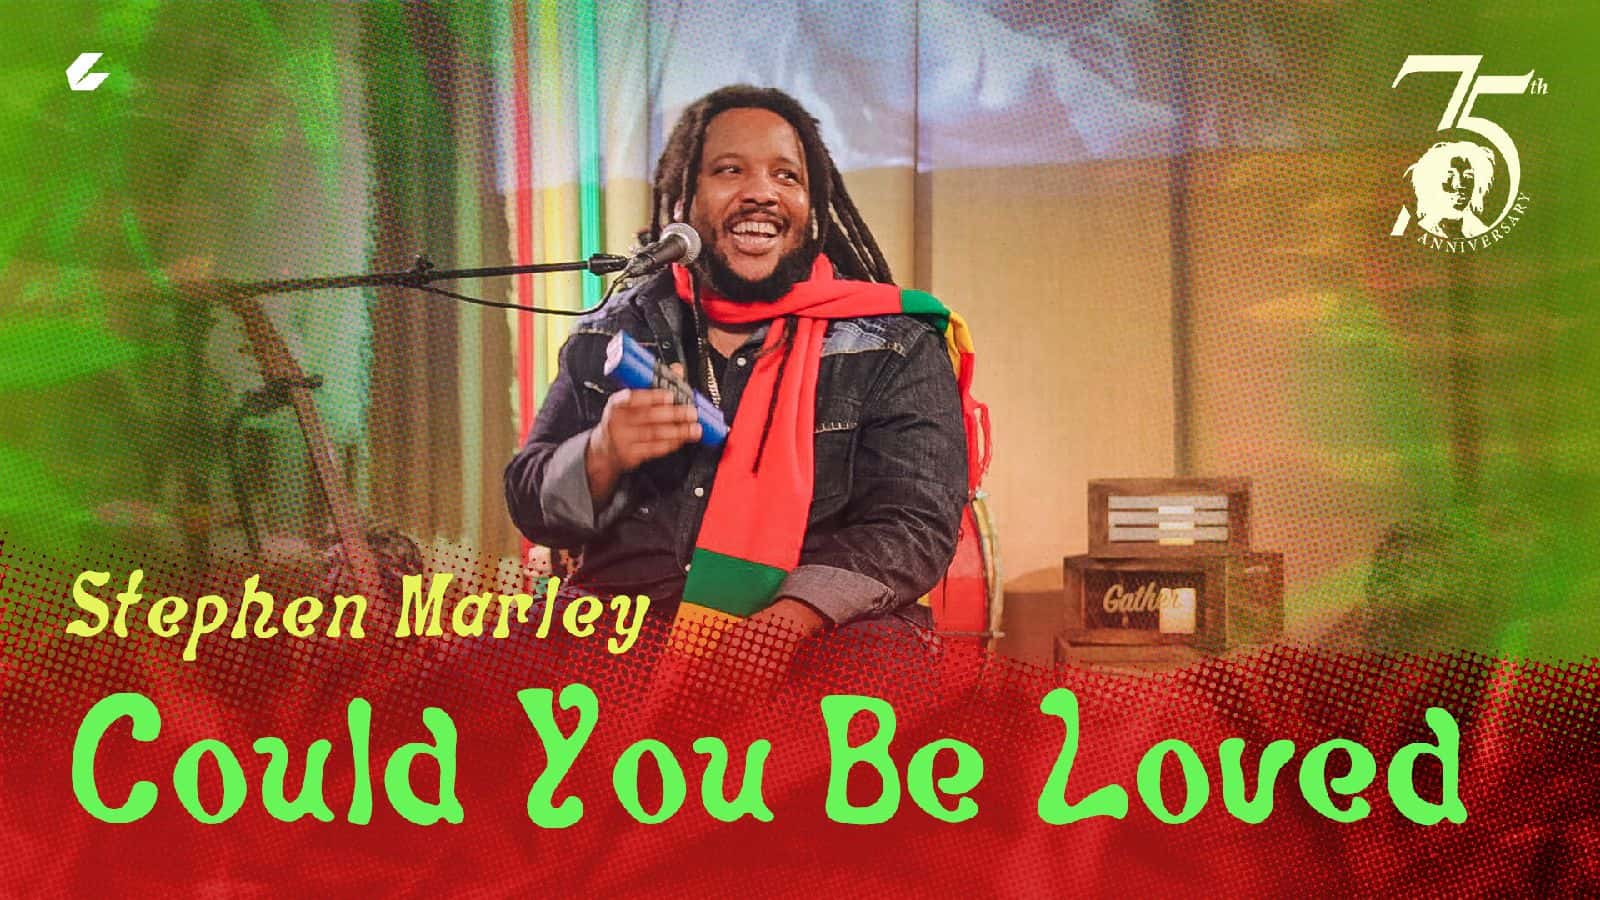 Stephen Marley 360 Could You Be Loved